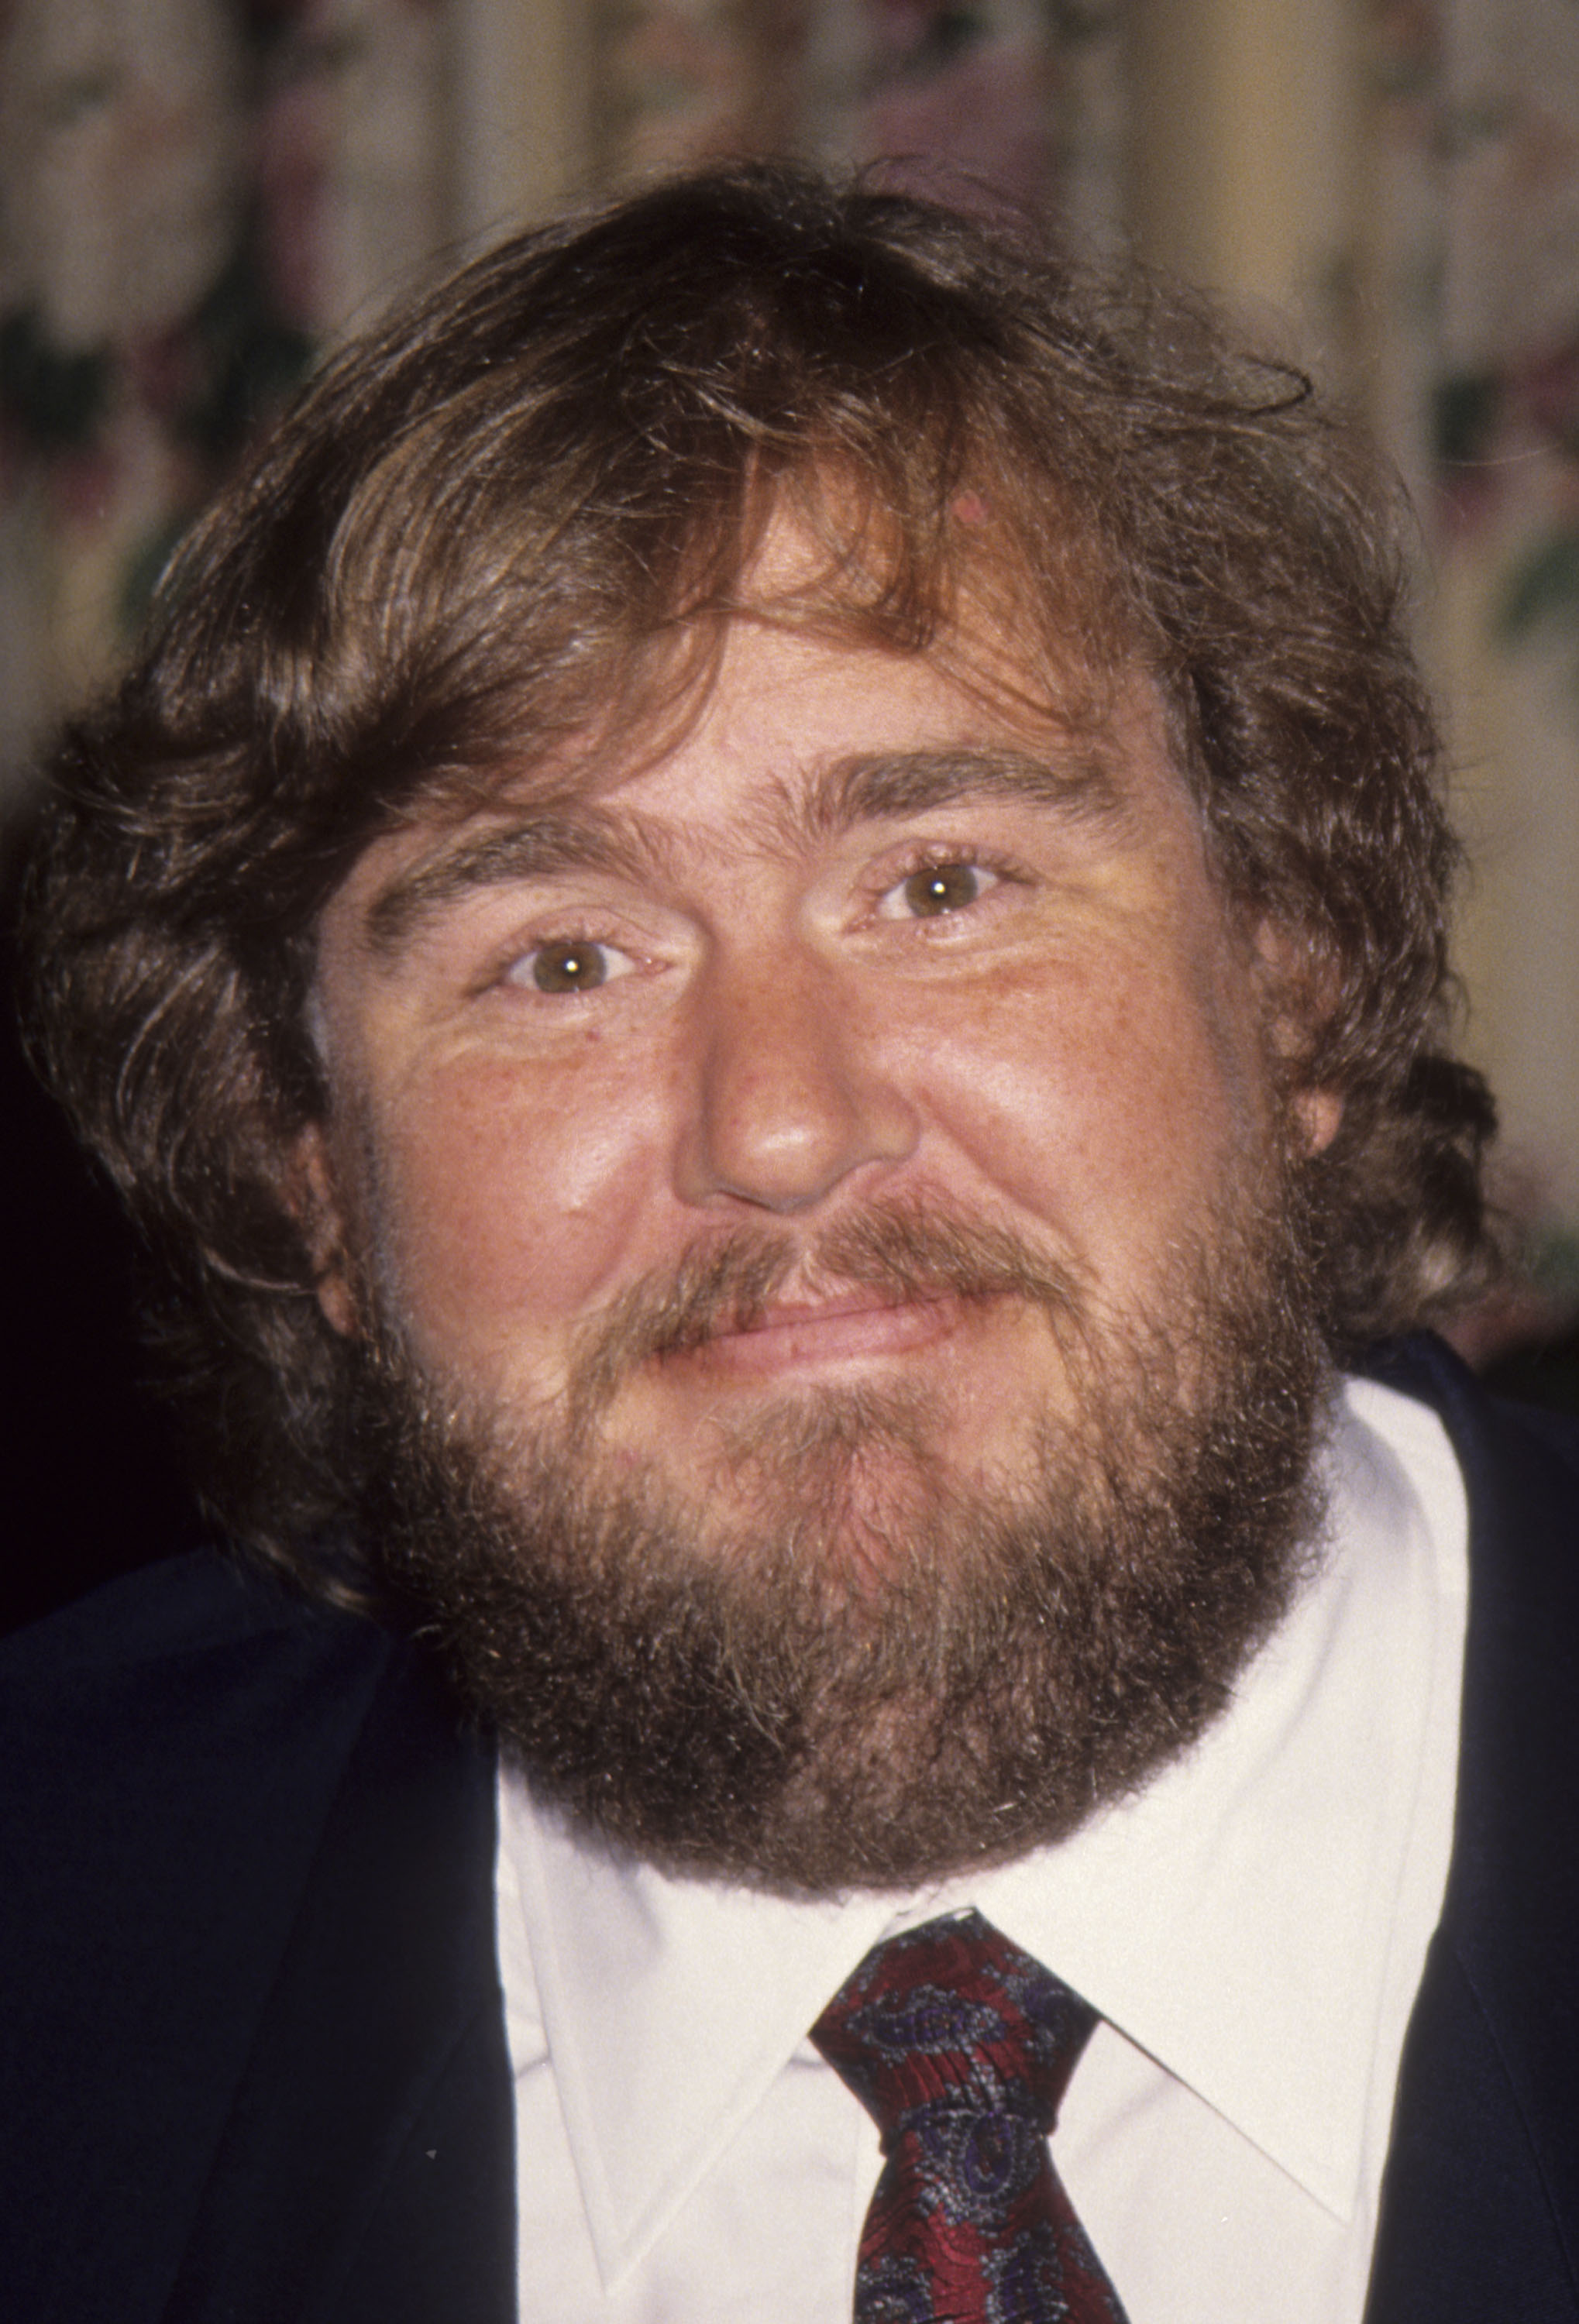 John Candy at the "Cool Comedy-Hot Cuisine Benefit for Scleroderma" on July 11, 1993, in Santa Monica, California. | Source: Getty Images